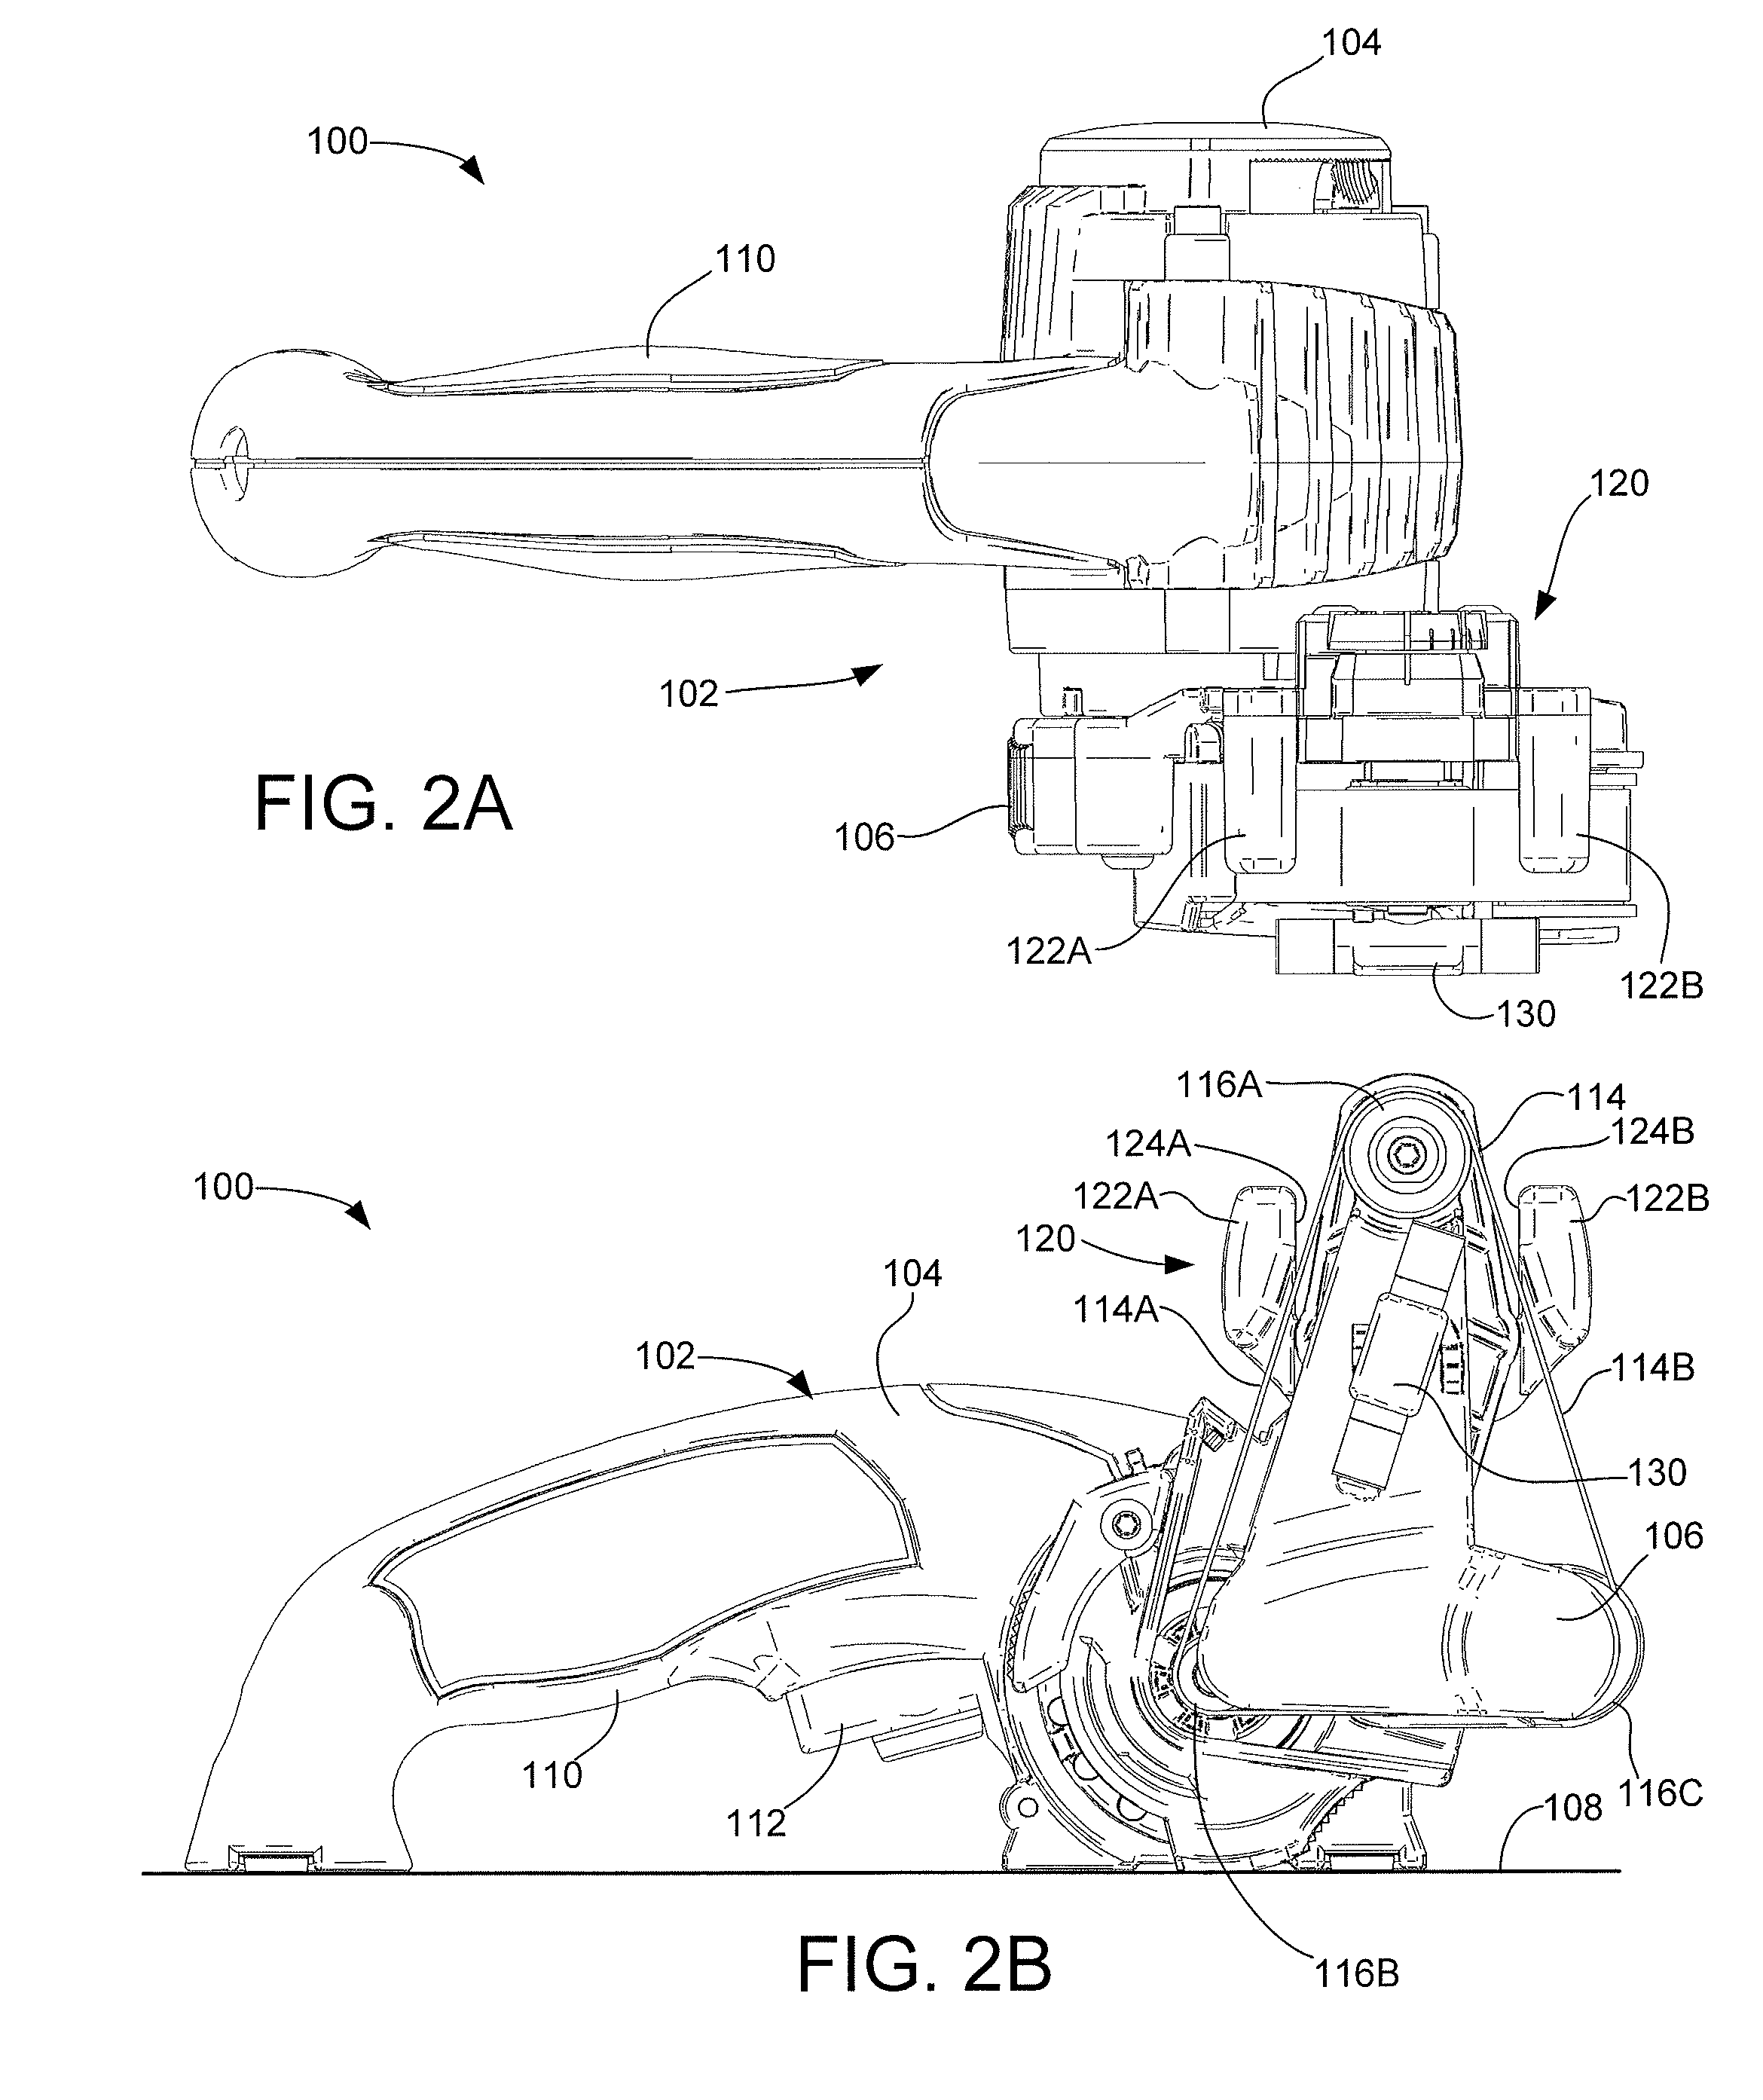 Selectively Deployable Rotatable Edge Guide to Support a Cutting Tool During a Sharpening Operation